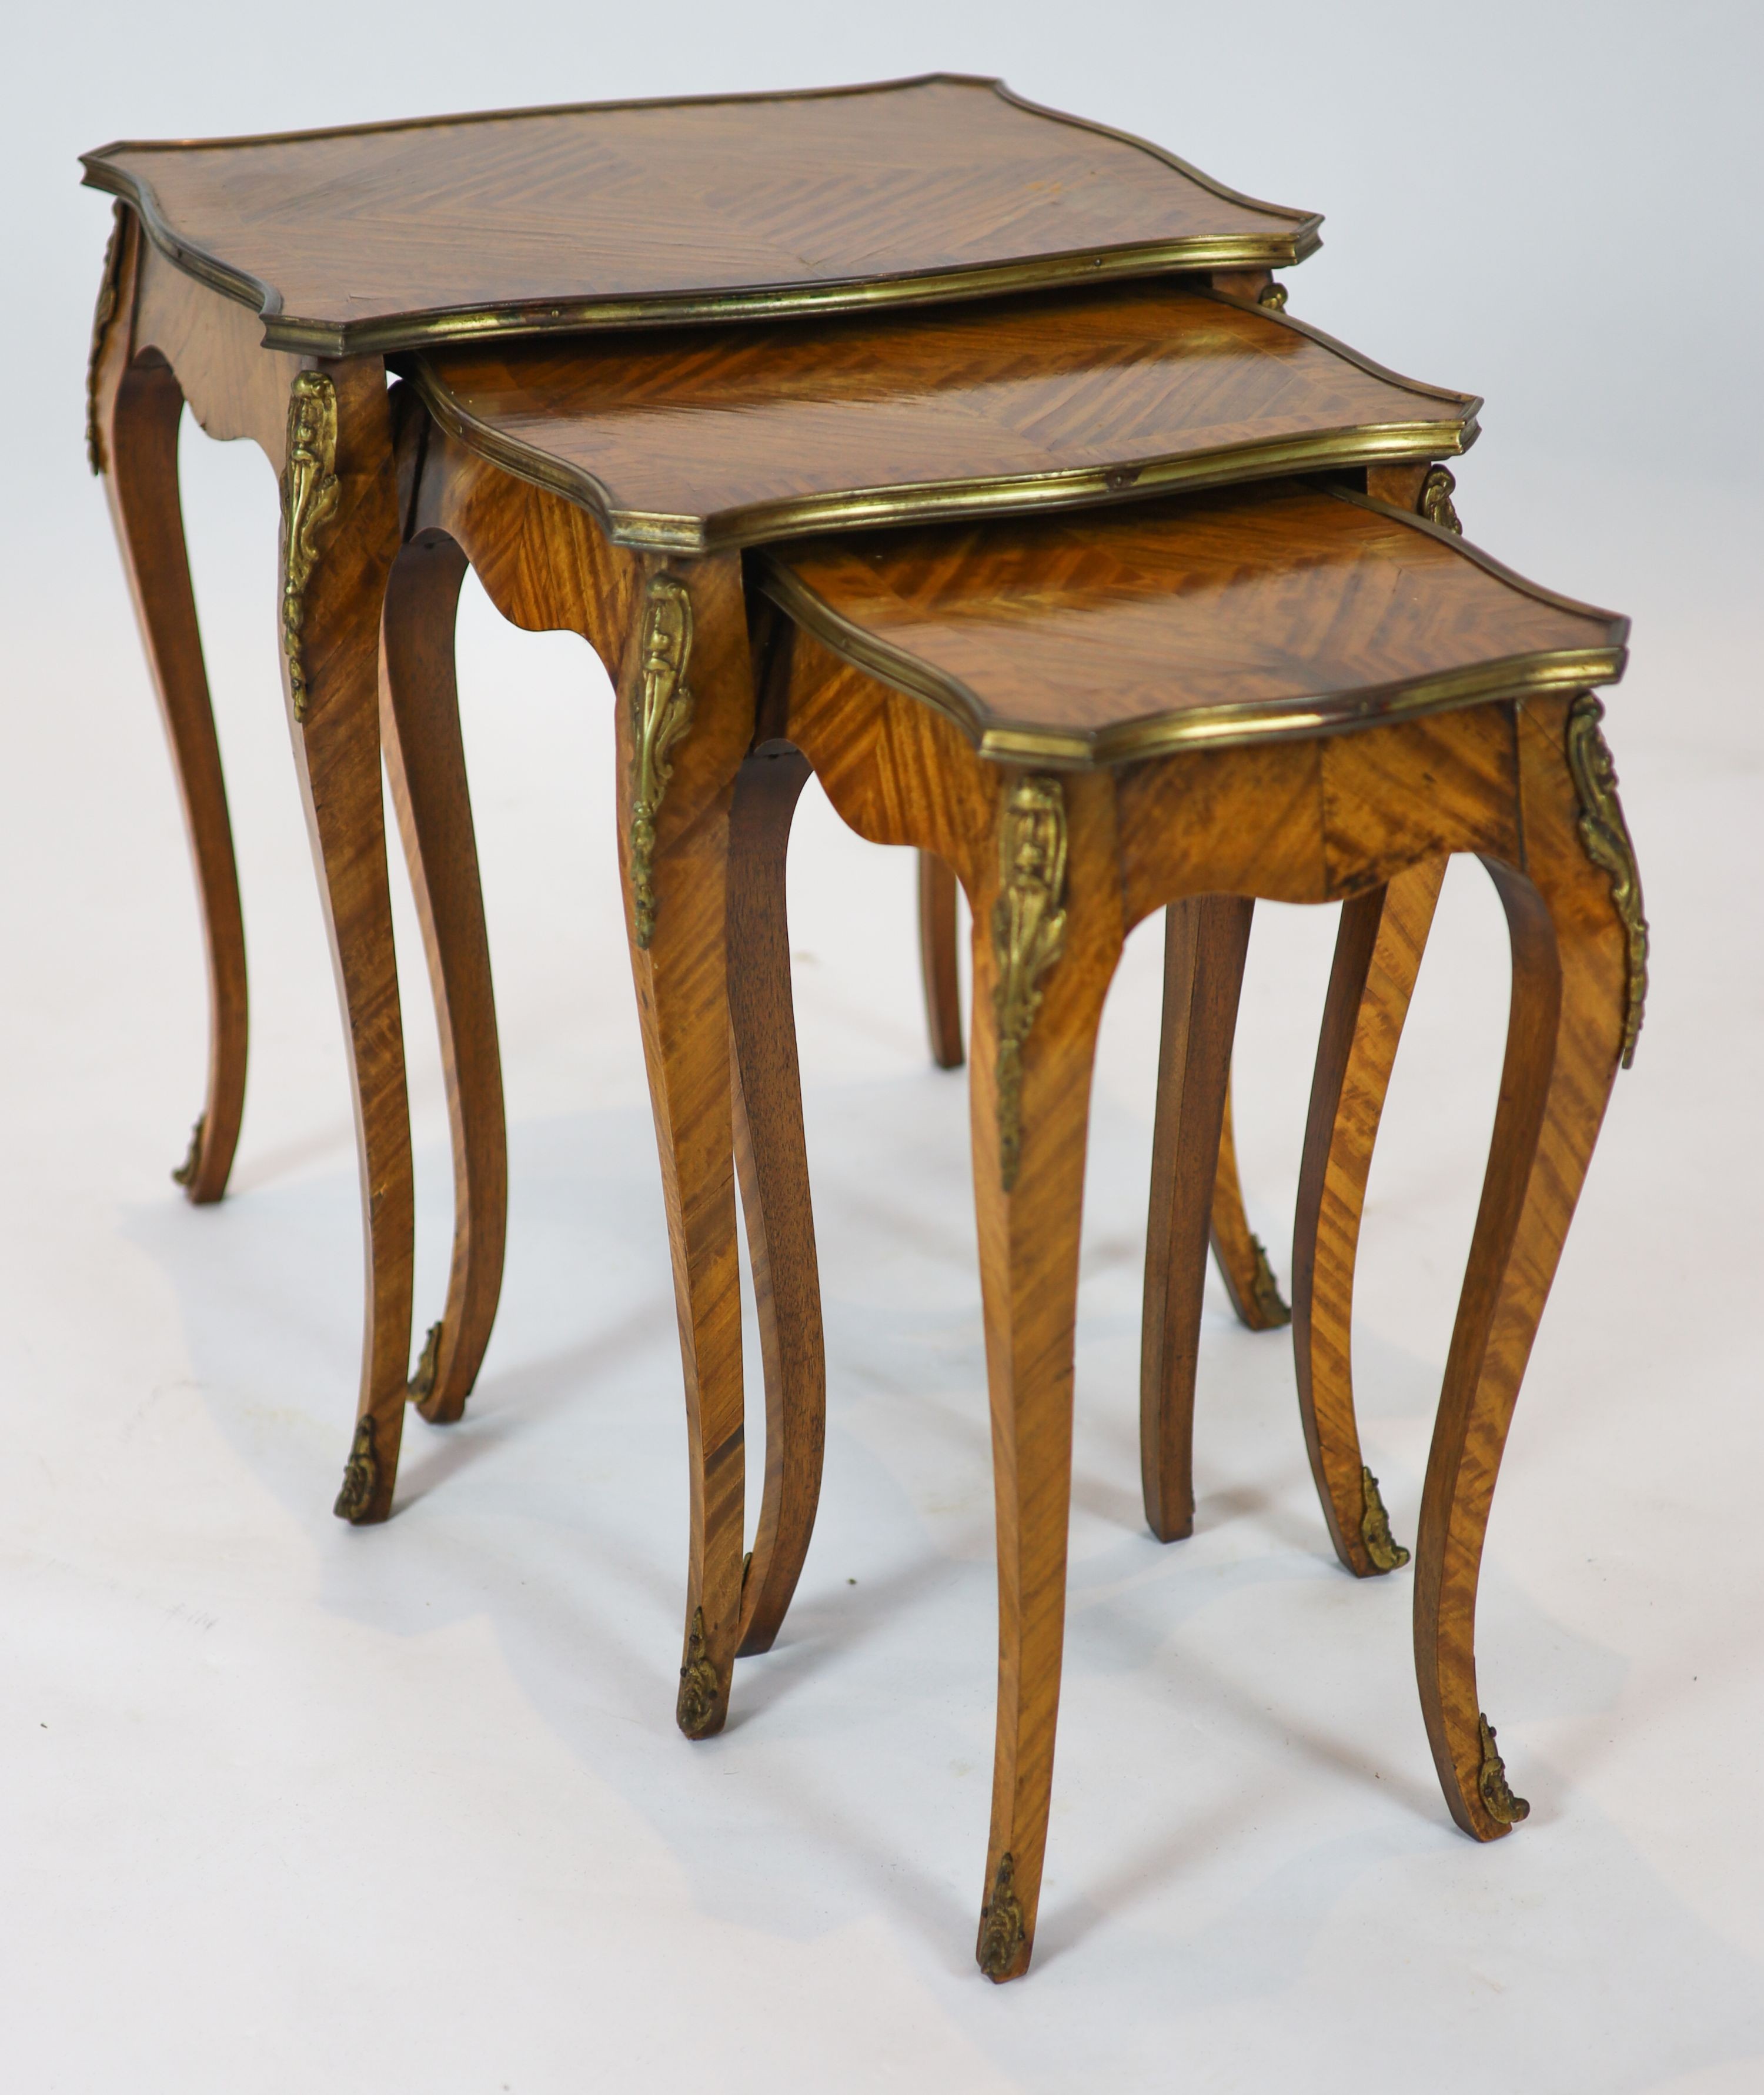 A nest of three Louis XV style ormolu mounted banded kingwood tables, with serpentine sides, on cabriole legs, width 51cm, depth 41cm, height 59cm